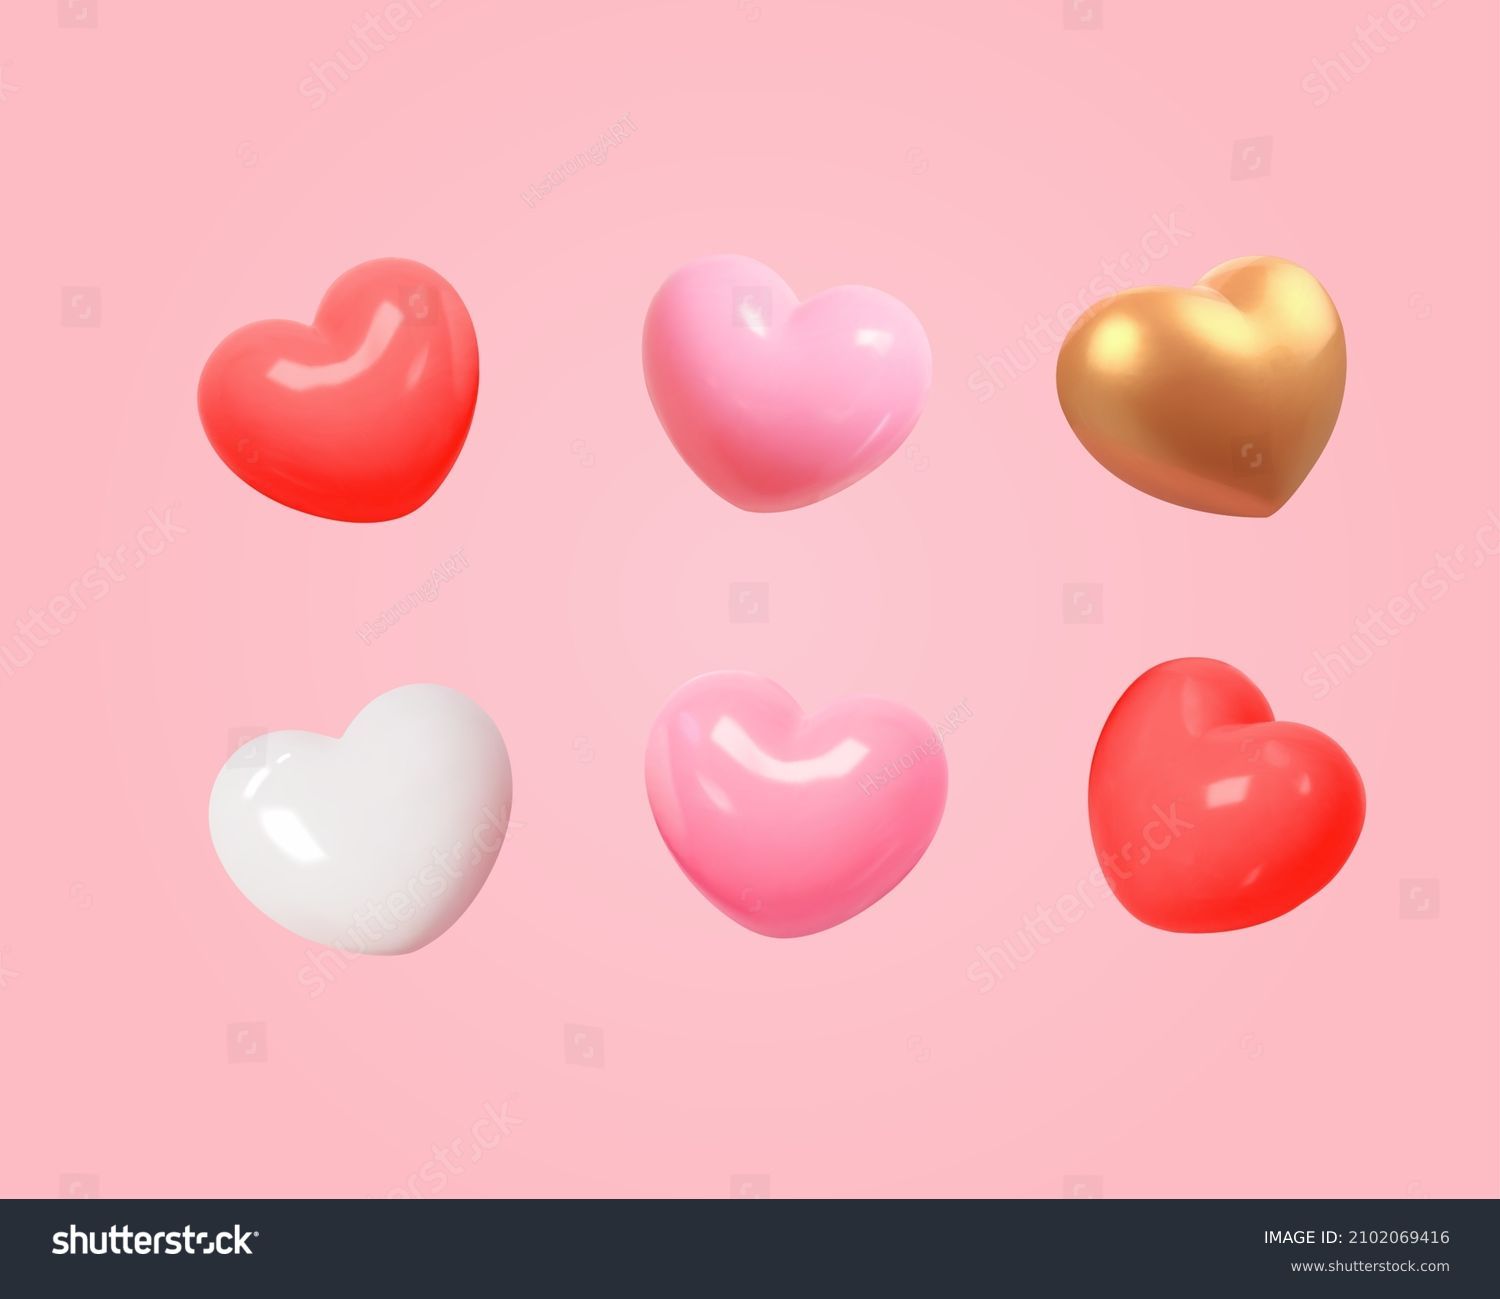 3d cartoon colorful heart shape toy collection, isolated on light pink background. Suitable for Valentine's Day and Mother's Day decoration. #2102069416